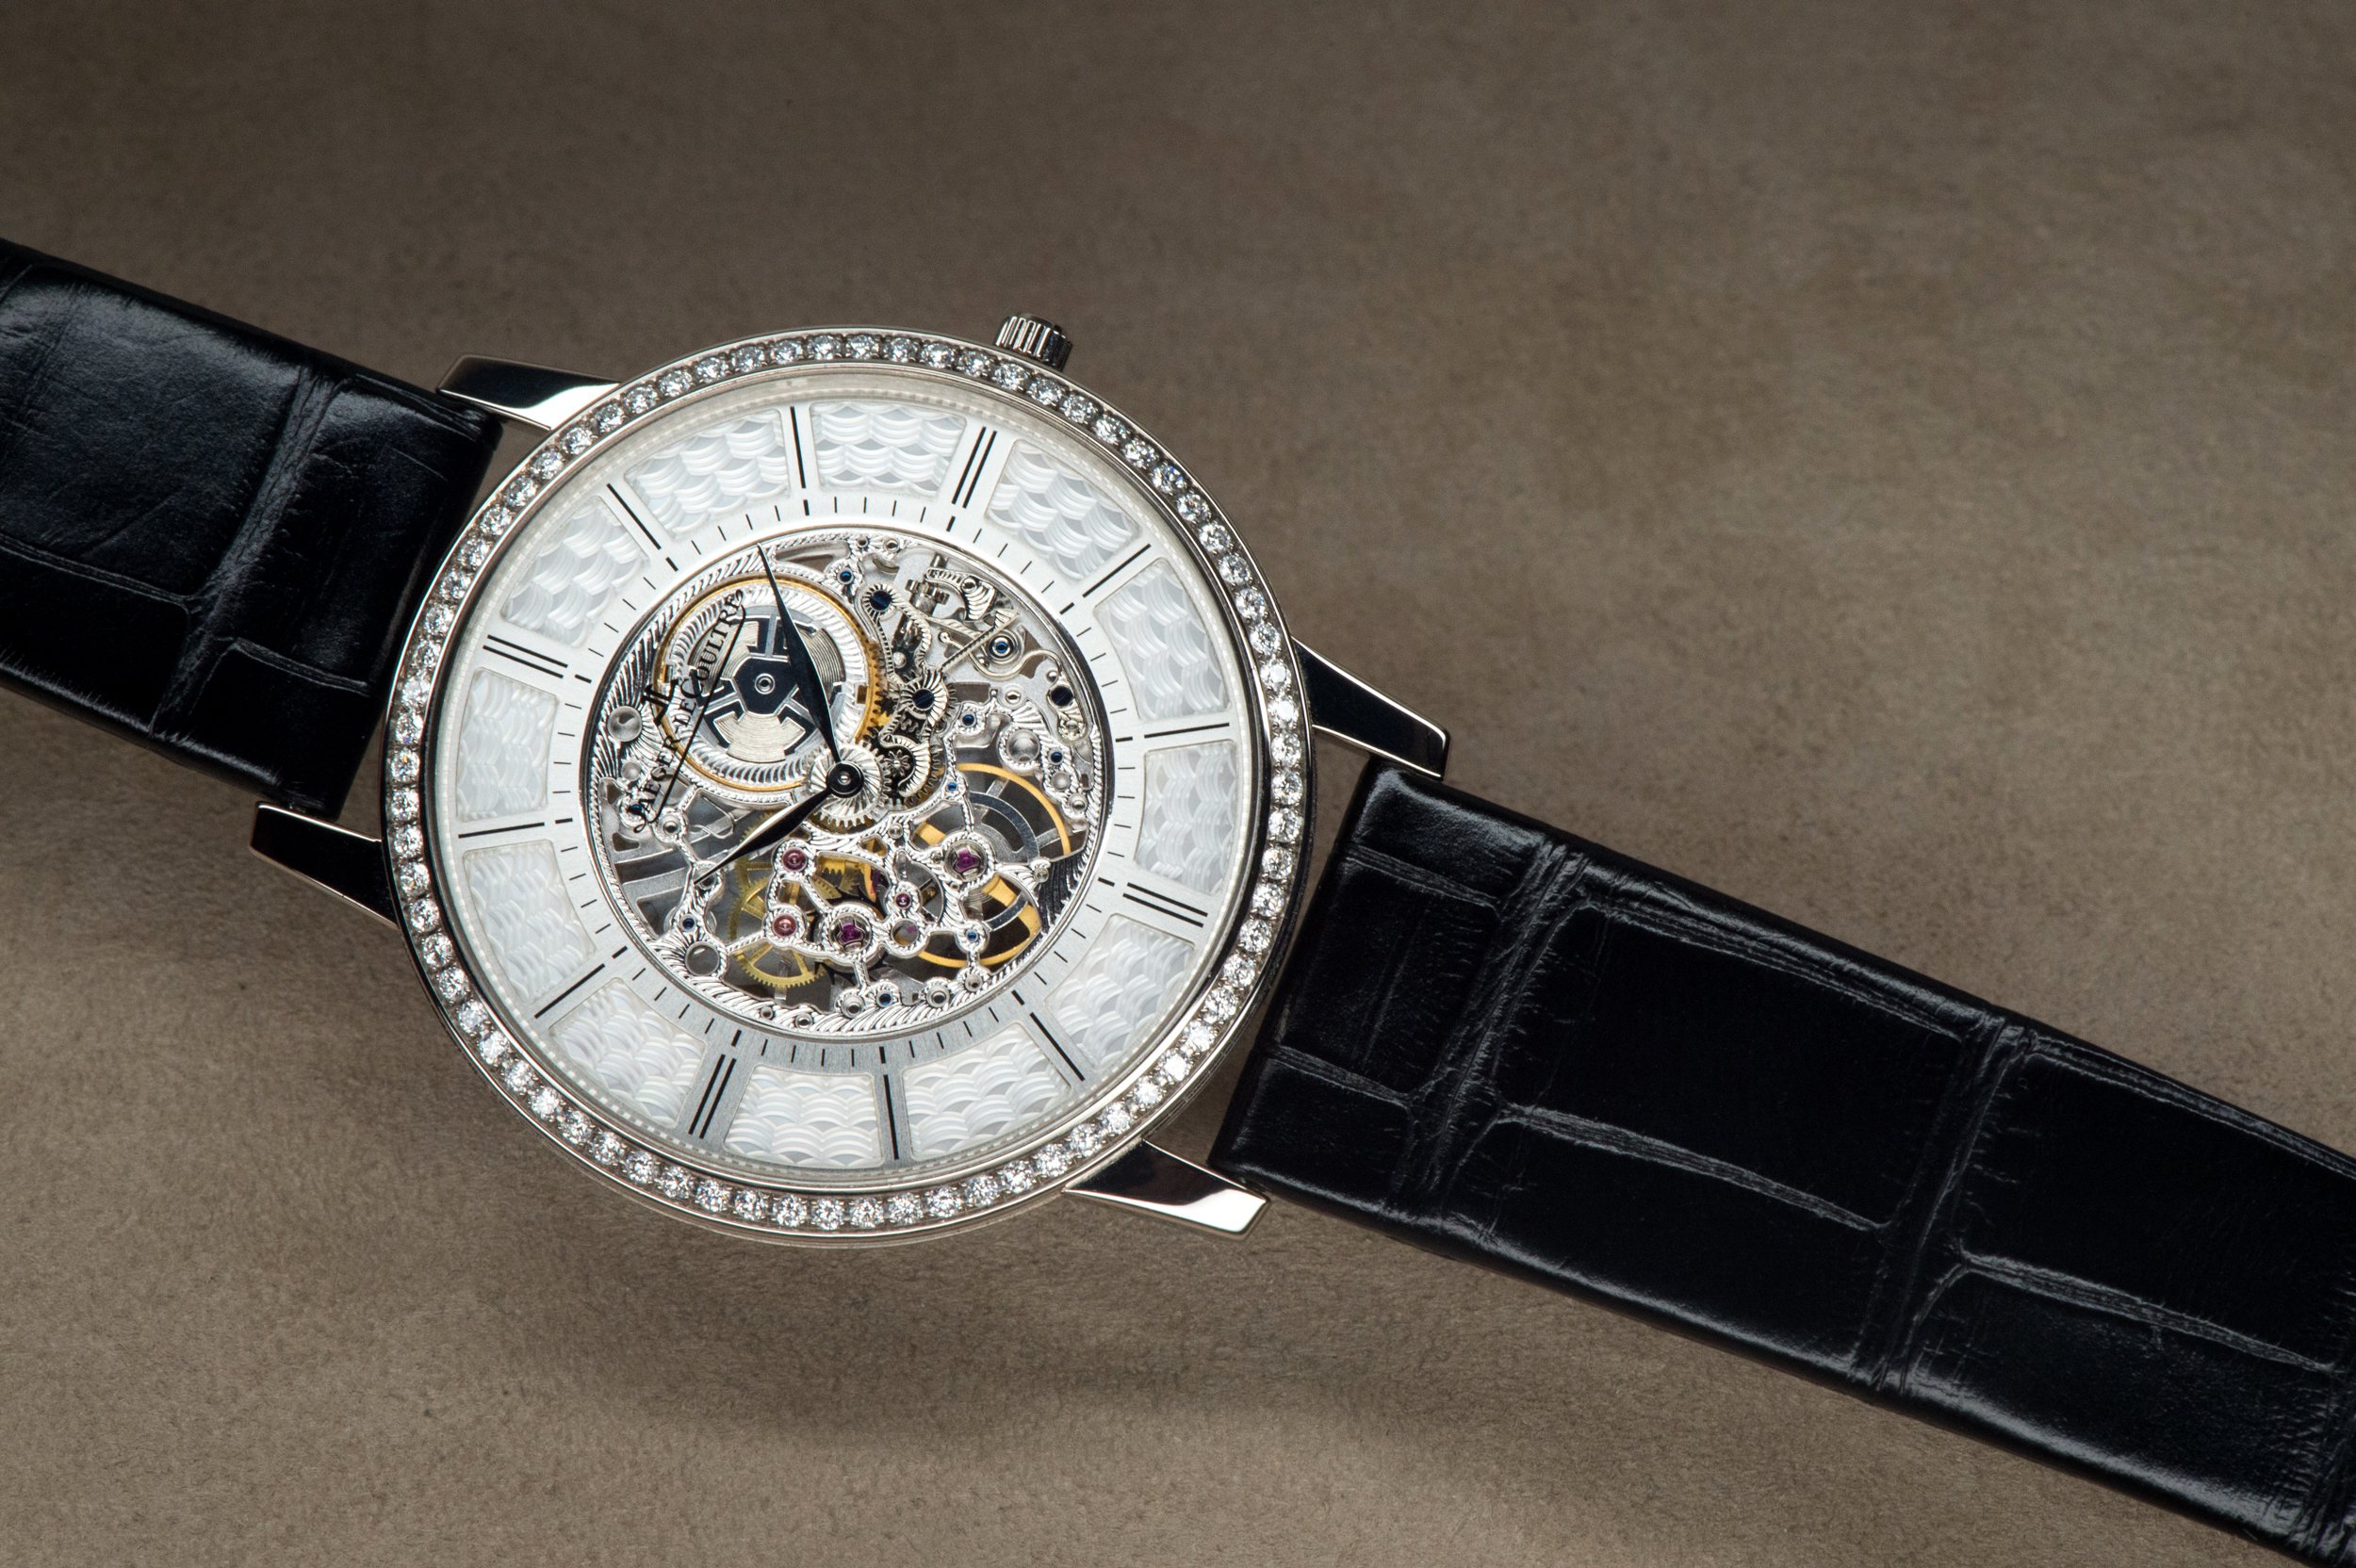 Jaeger-LeCoultre Master Ultra Thin Squelette Watch Feature